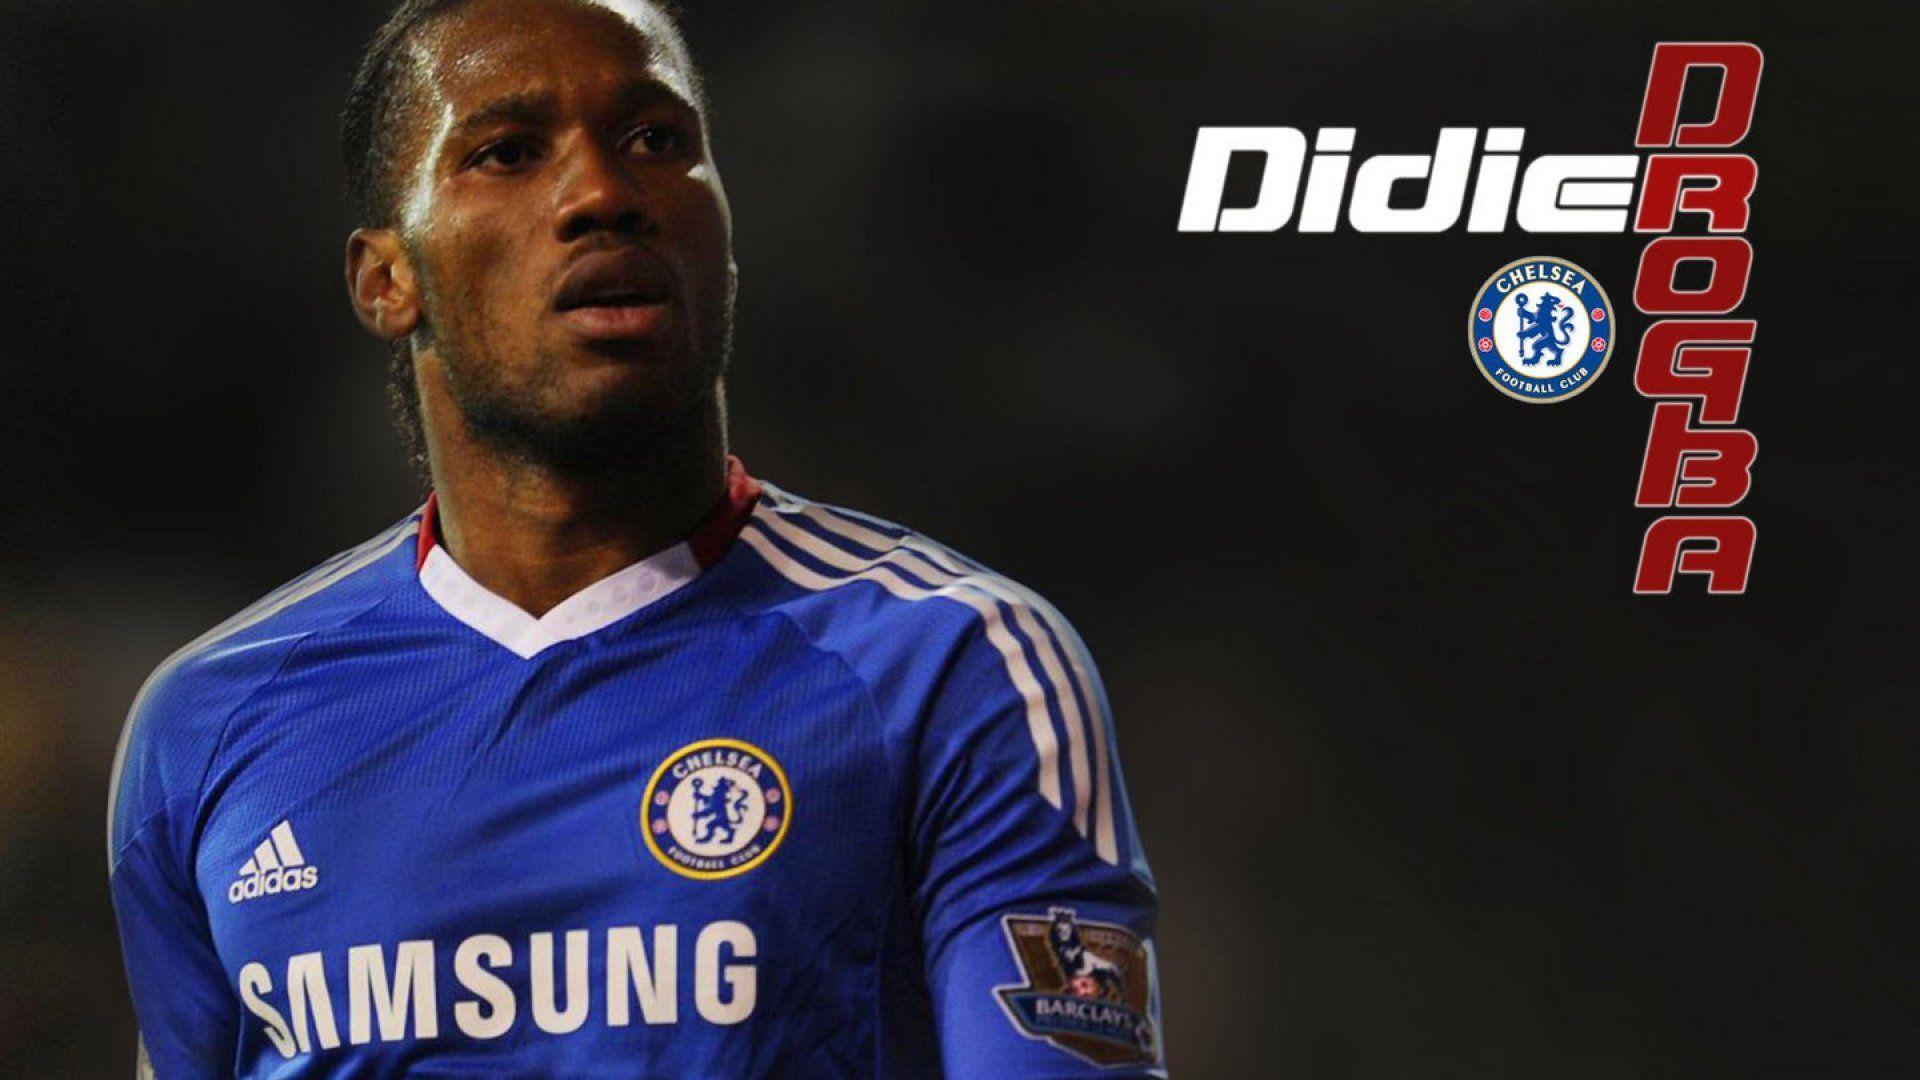 Chelsea FC Didier Drogba Wallpapers